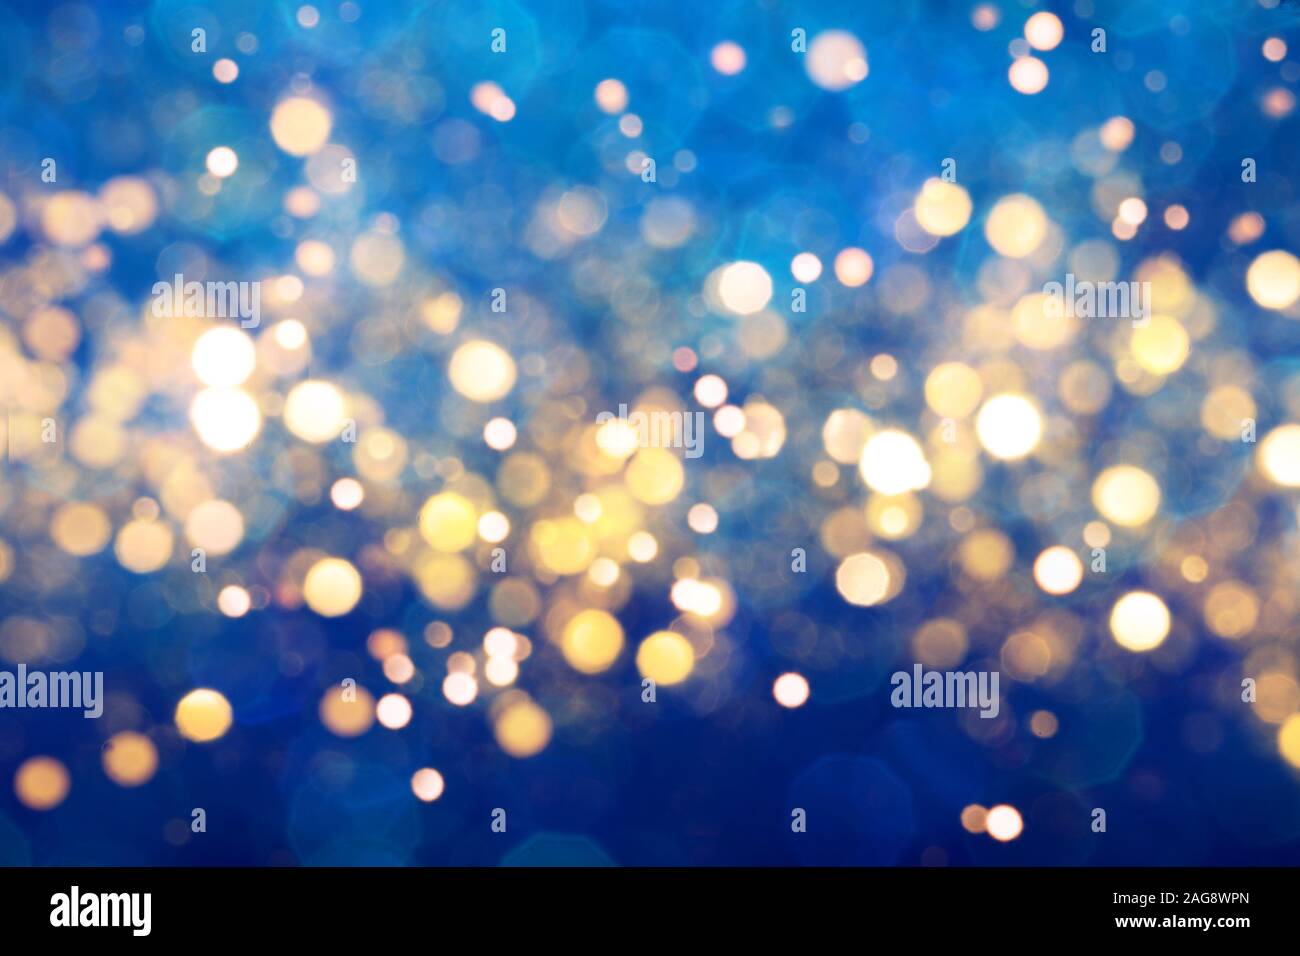 Blue festive background with sparkles in the bokeh. The concept of the celebration, the day of Christmas, New Year, birthday, ceremonies, events, etc. Stock Photo